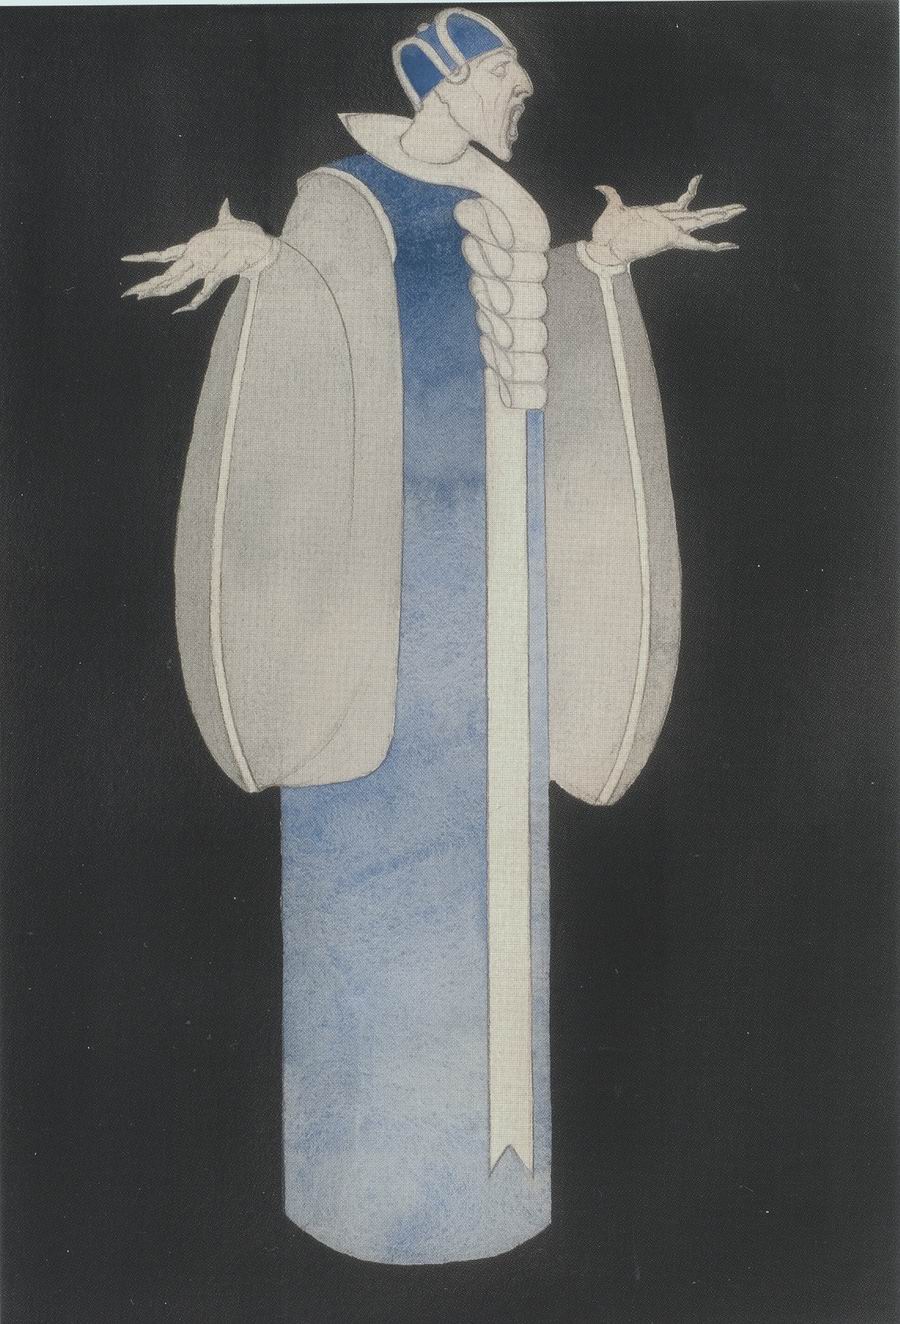 paper, watercolor, 28x19  1930 State Museum of Drama, Music, Film and Choreography